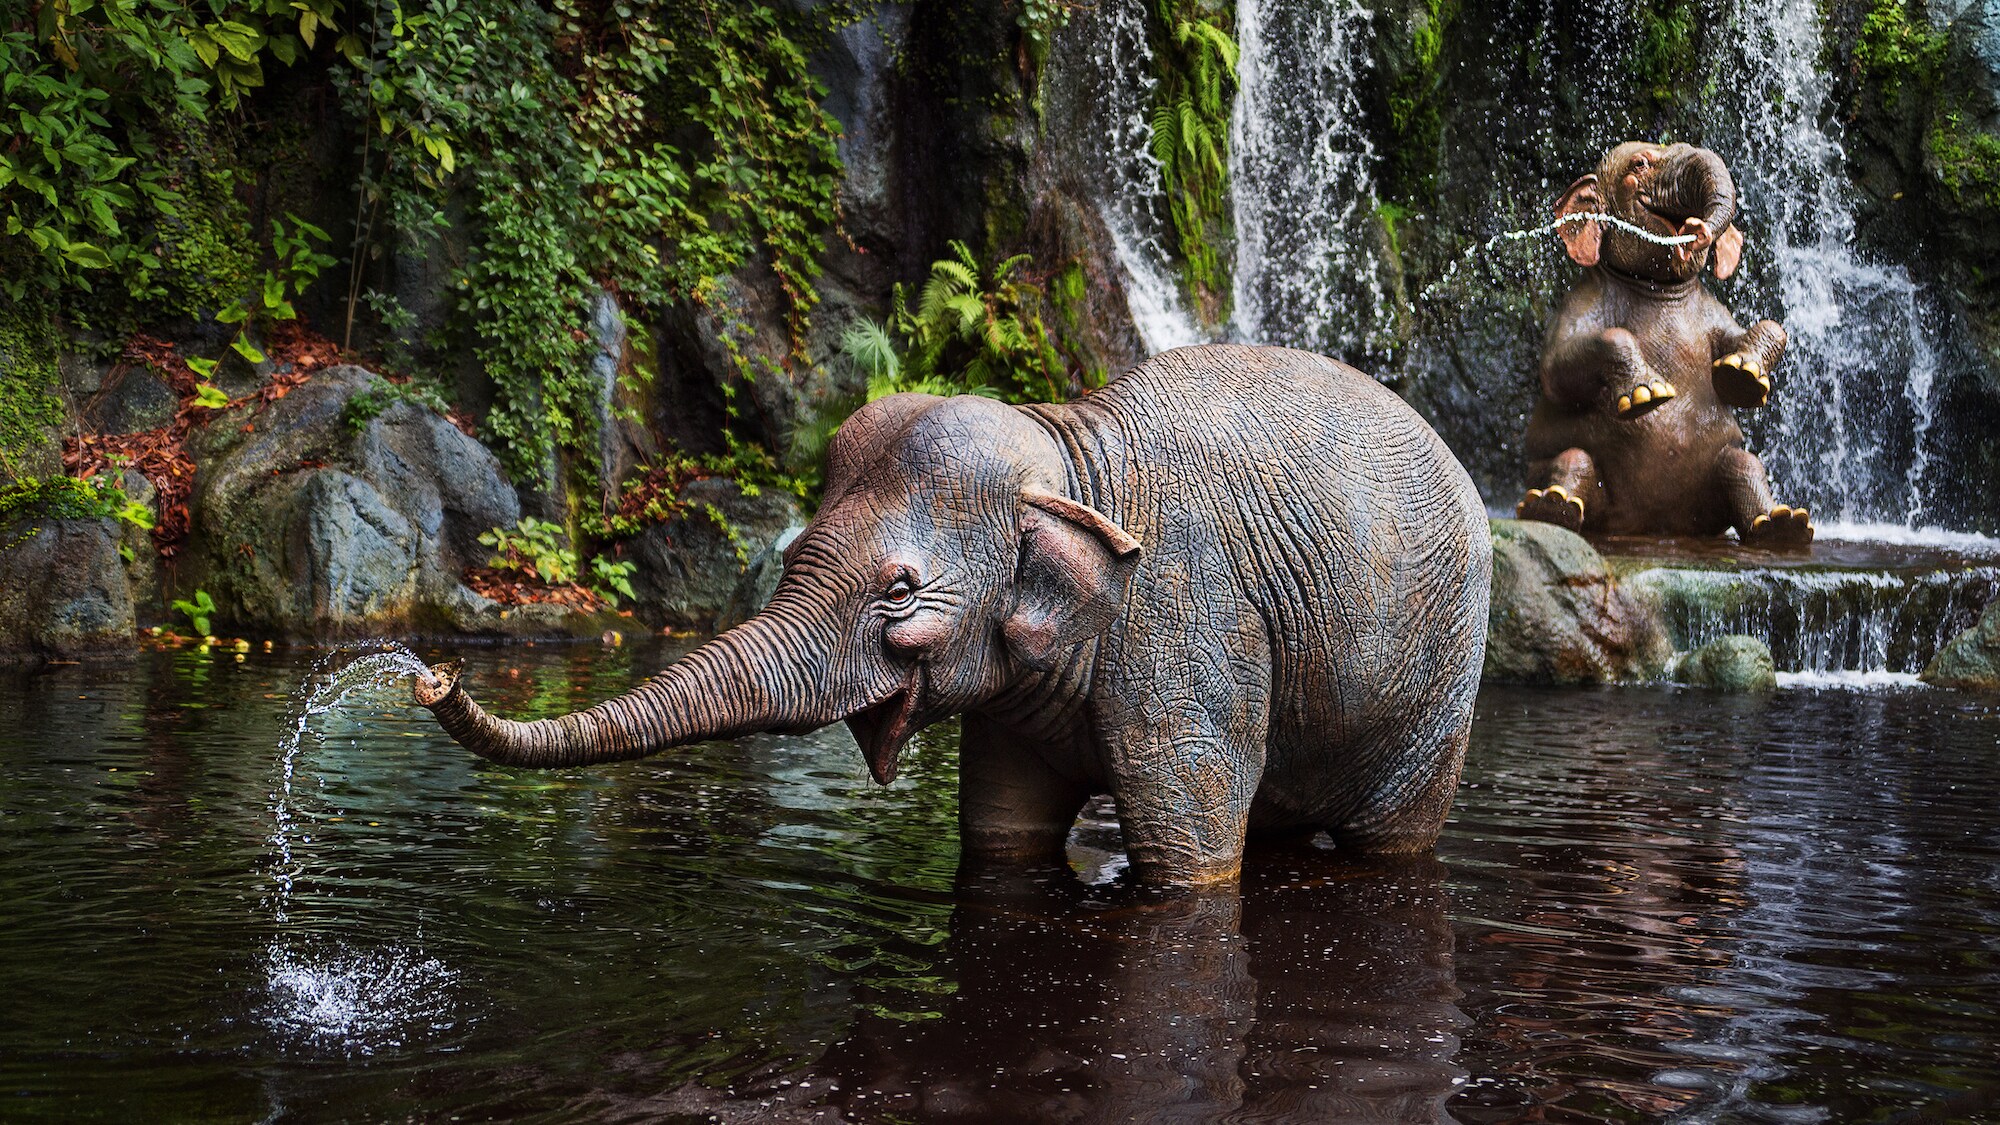 Image of an elephant from the Jungle Cruise ride.